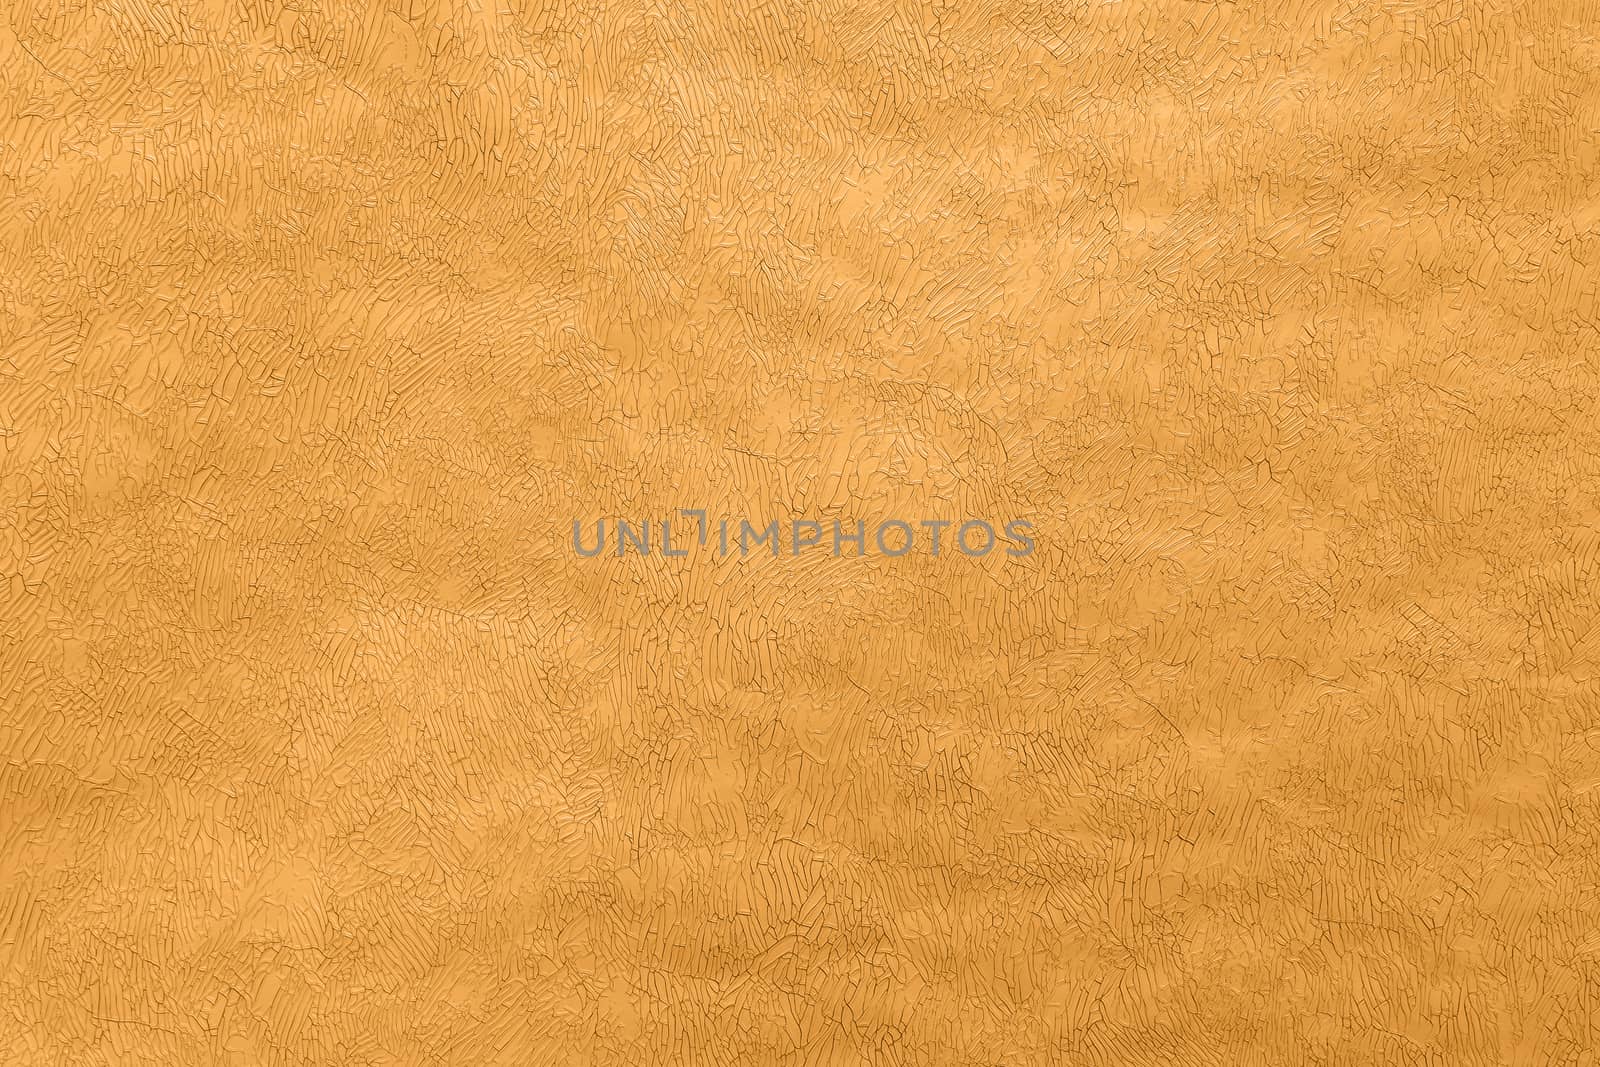 mottled paper texture, can be used for background by bonilook